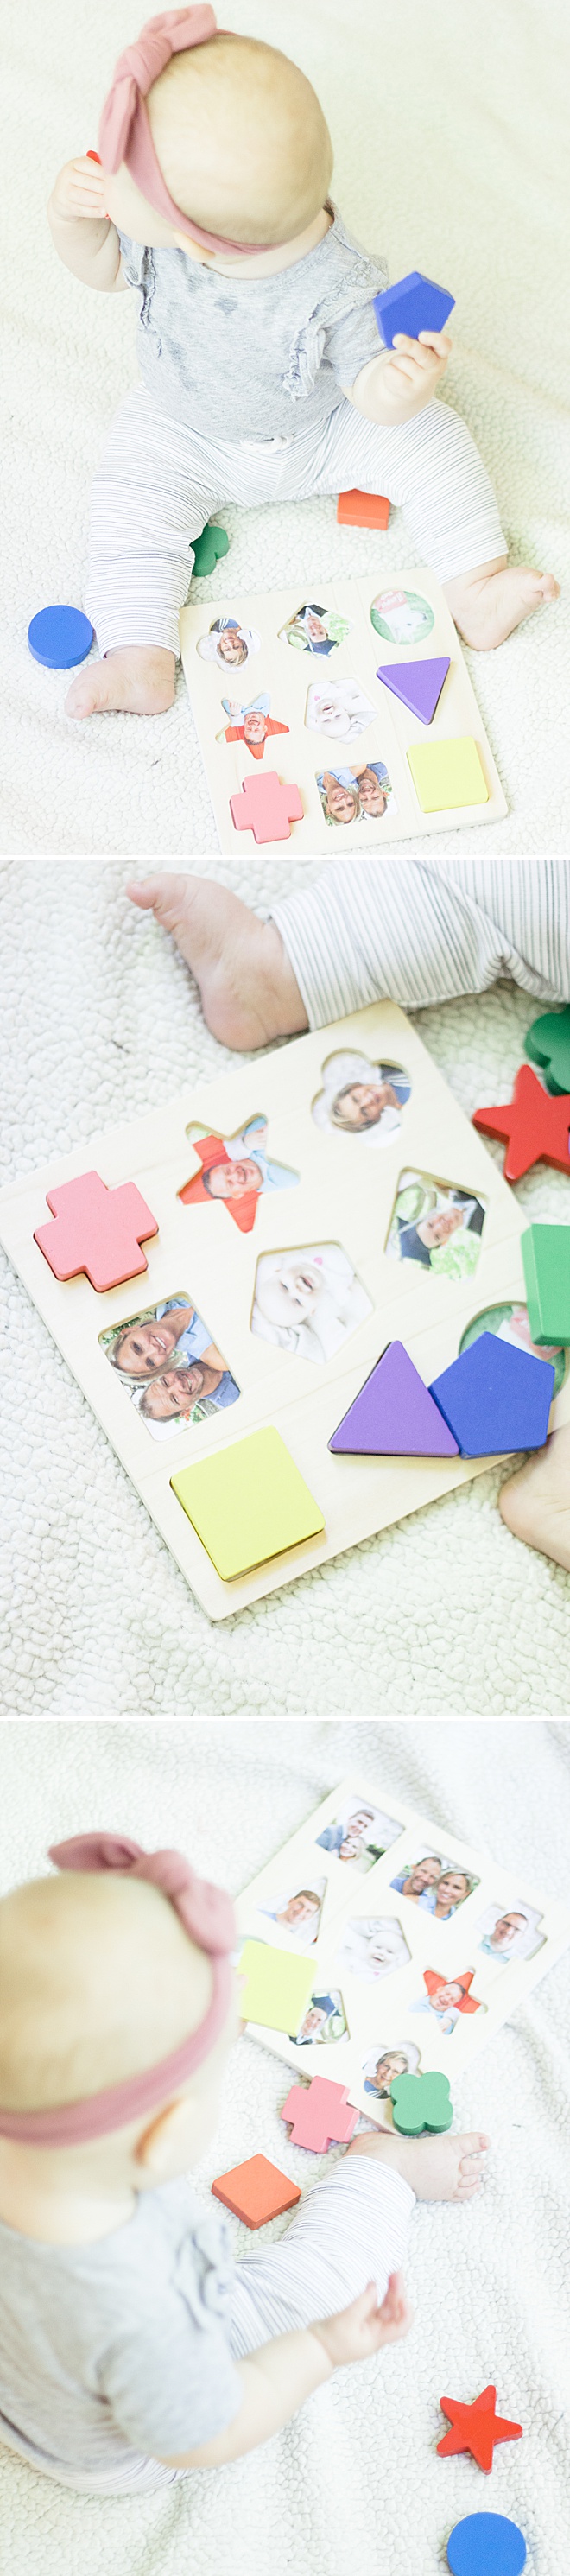 Your baby loves seeing faces! Make this custom puzzle filled with loved ones to help your baby's memory and dexterity!